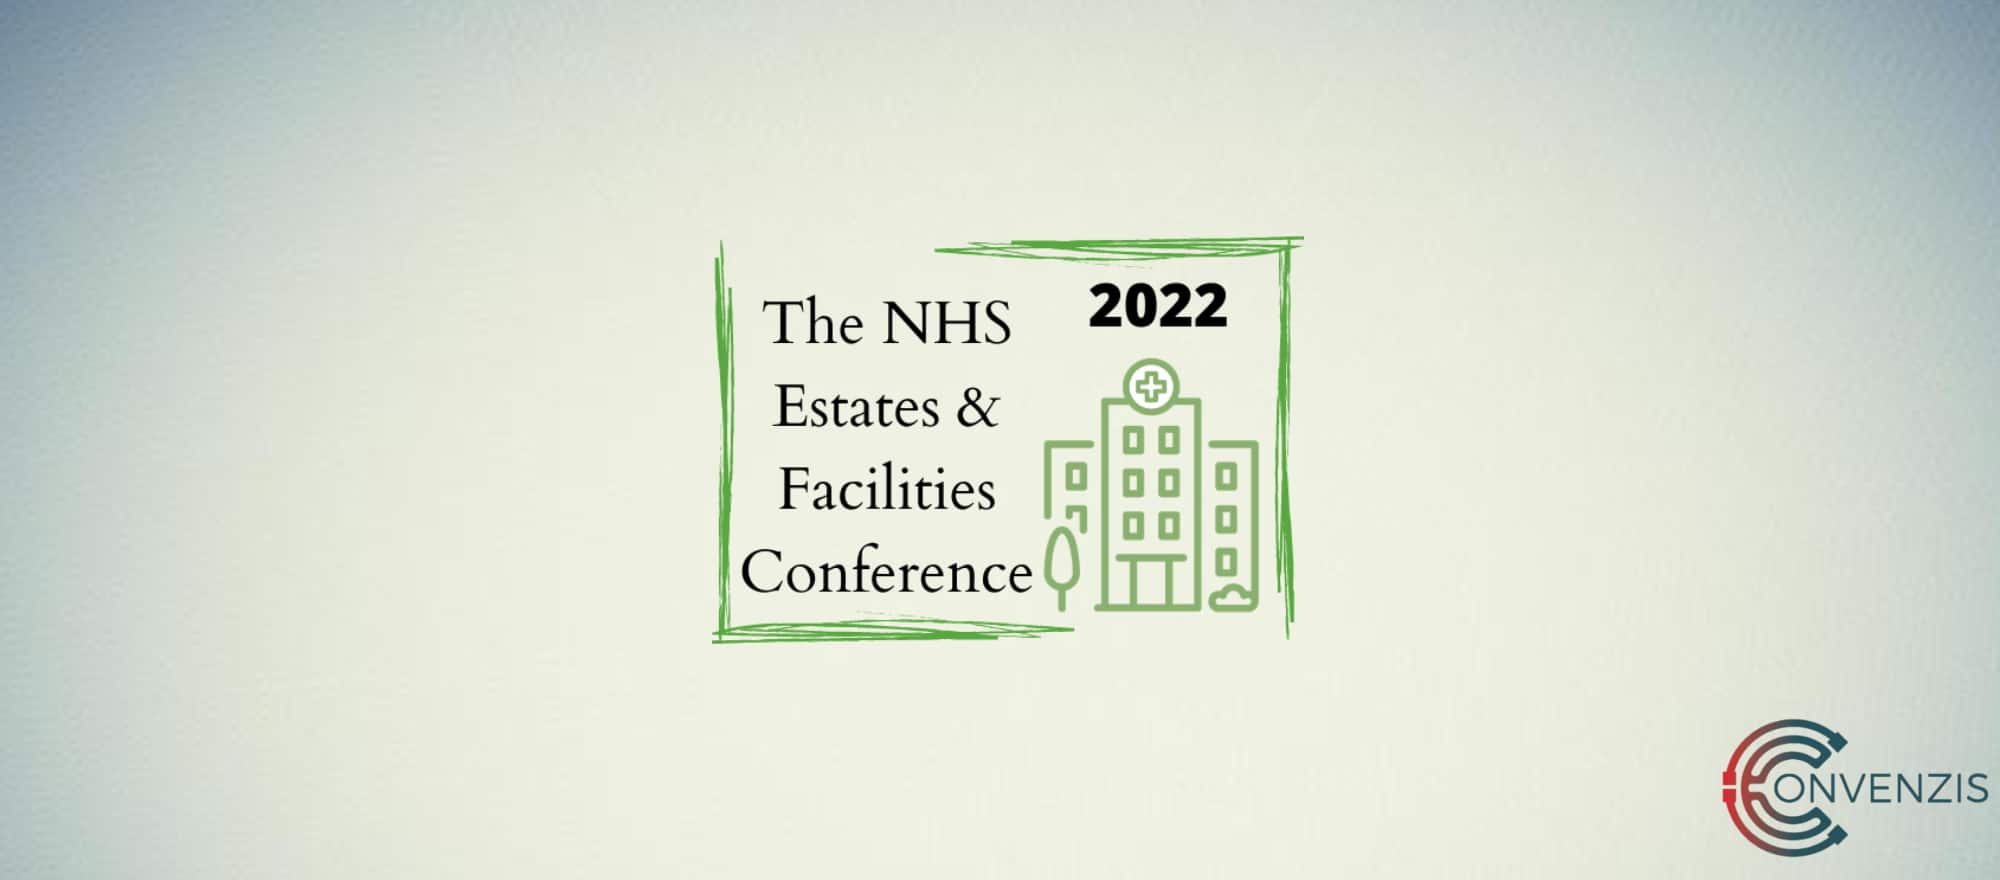 The NHS Estates and Facilities Conference 2022